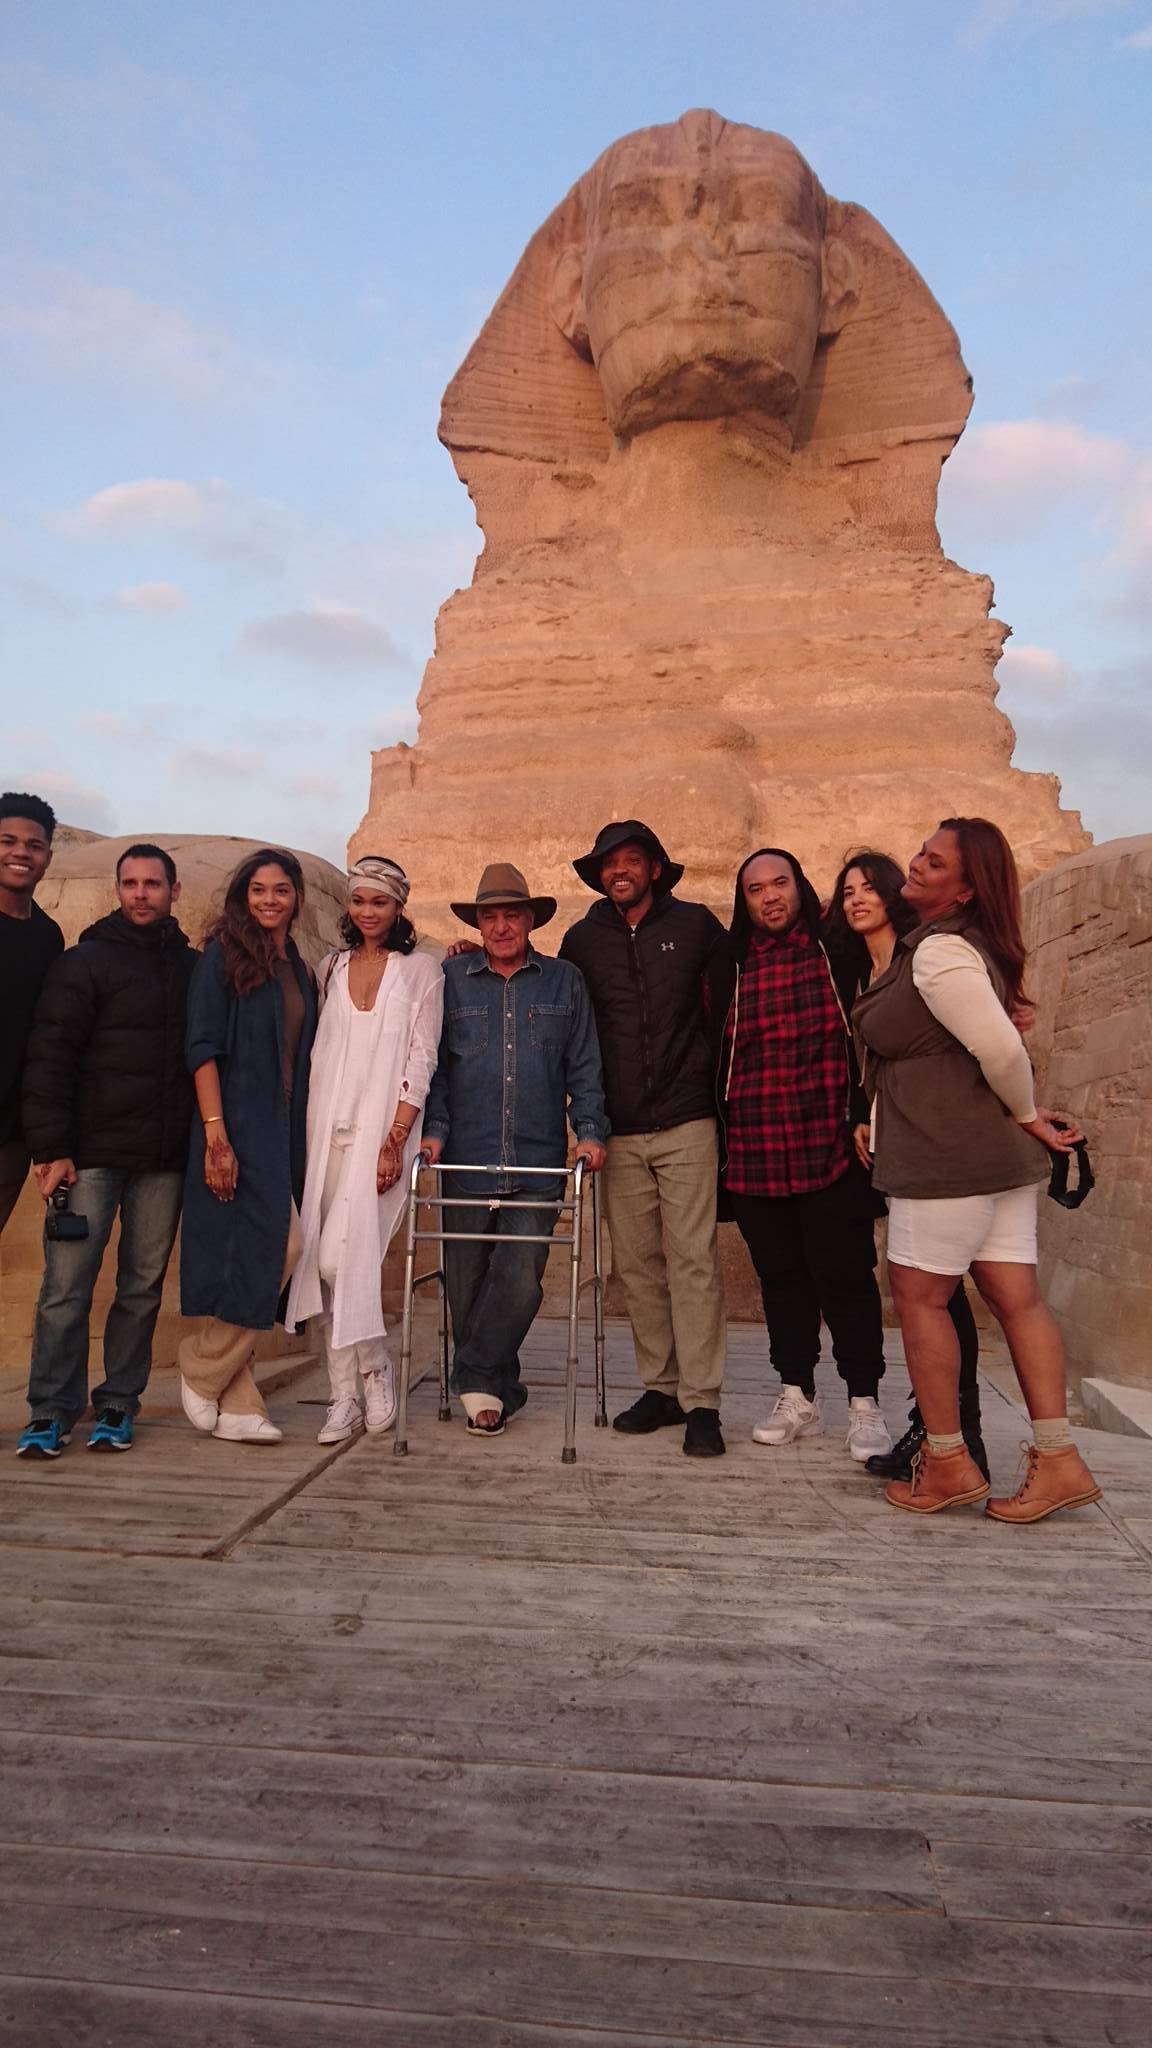 Will Smith and his family with Hawass before The Sphinx. Photo courtesy of Hawass